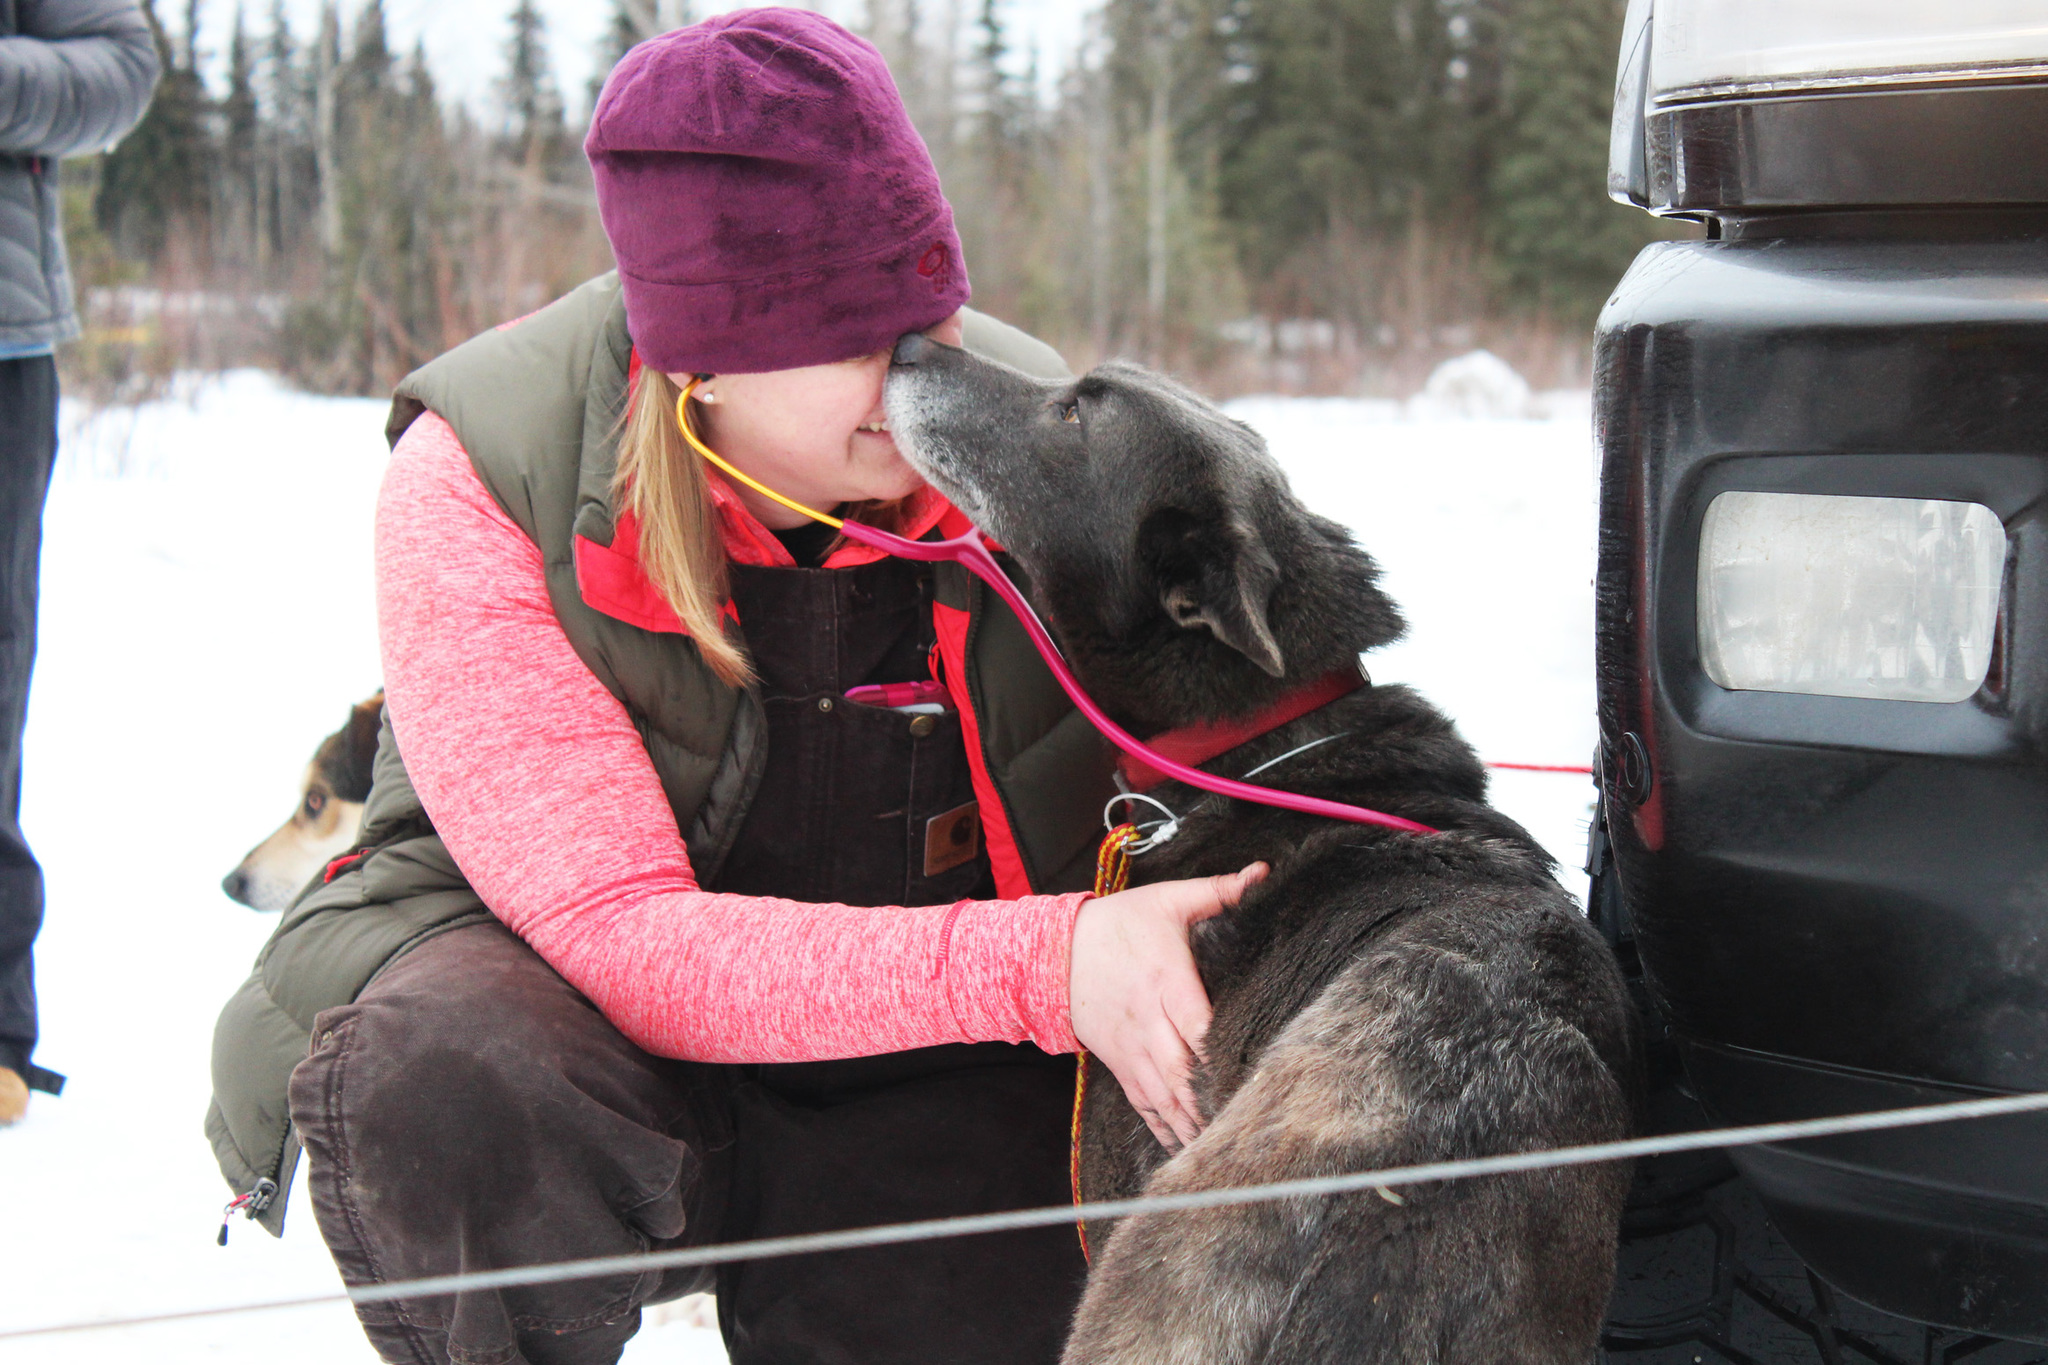 Erin Earhart, a veterinarian from Anchorage, gets a kiss from a sled dog named Oleada while she inspects teams prior to this weekend's long-anticipated Tustumena 200 Sled Dog Race on Friday, Jan. 27, 2017 outside the Soldotna Regional Sports Complex in Soldotna, Alaska. Earhart and other vets checked teeth, eyes, feet, weight and a variety of other factors before clearing dogs to race 200 miles through the Caribou Hills. (Megan Pacer/Peninsula Clarion)